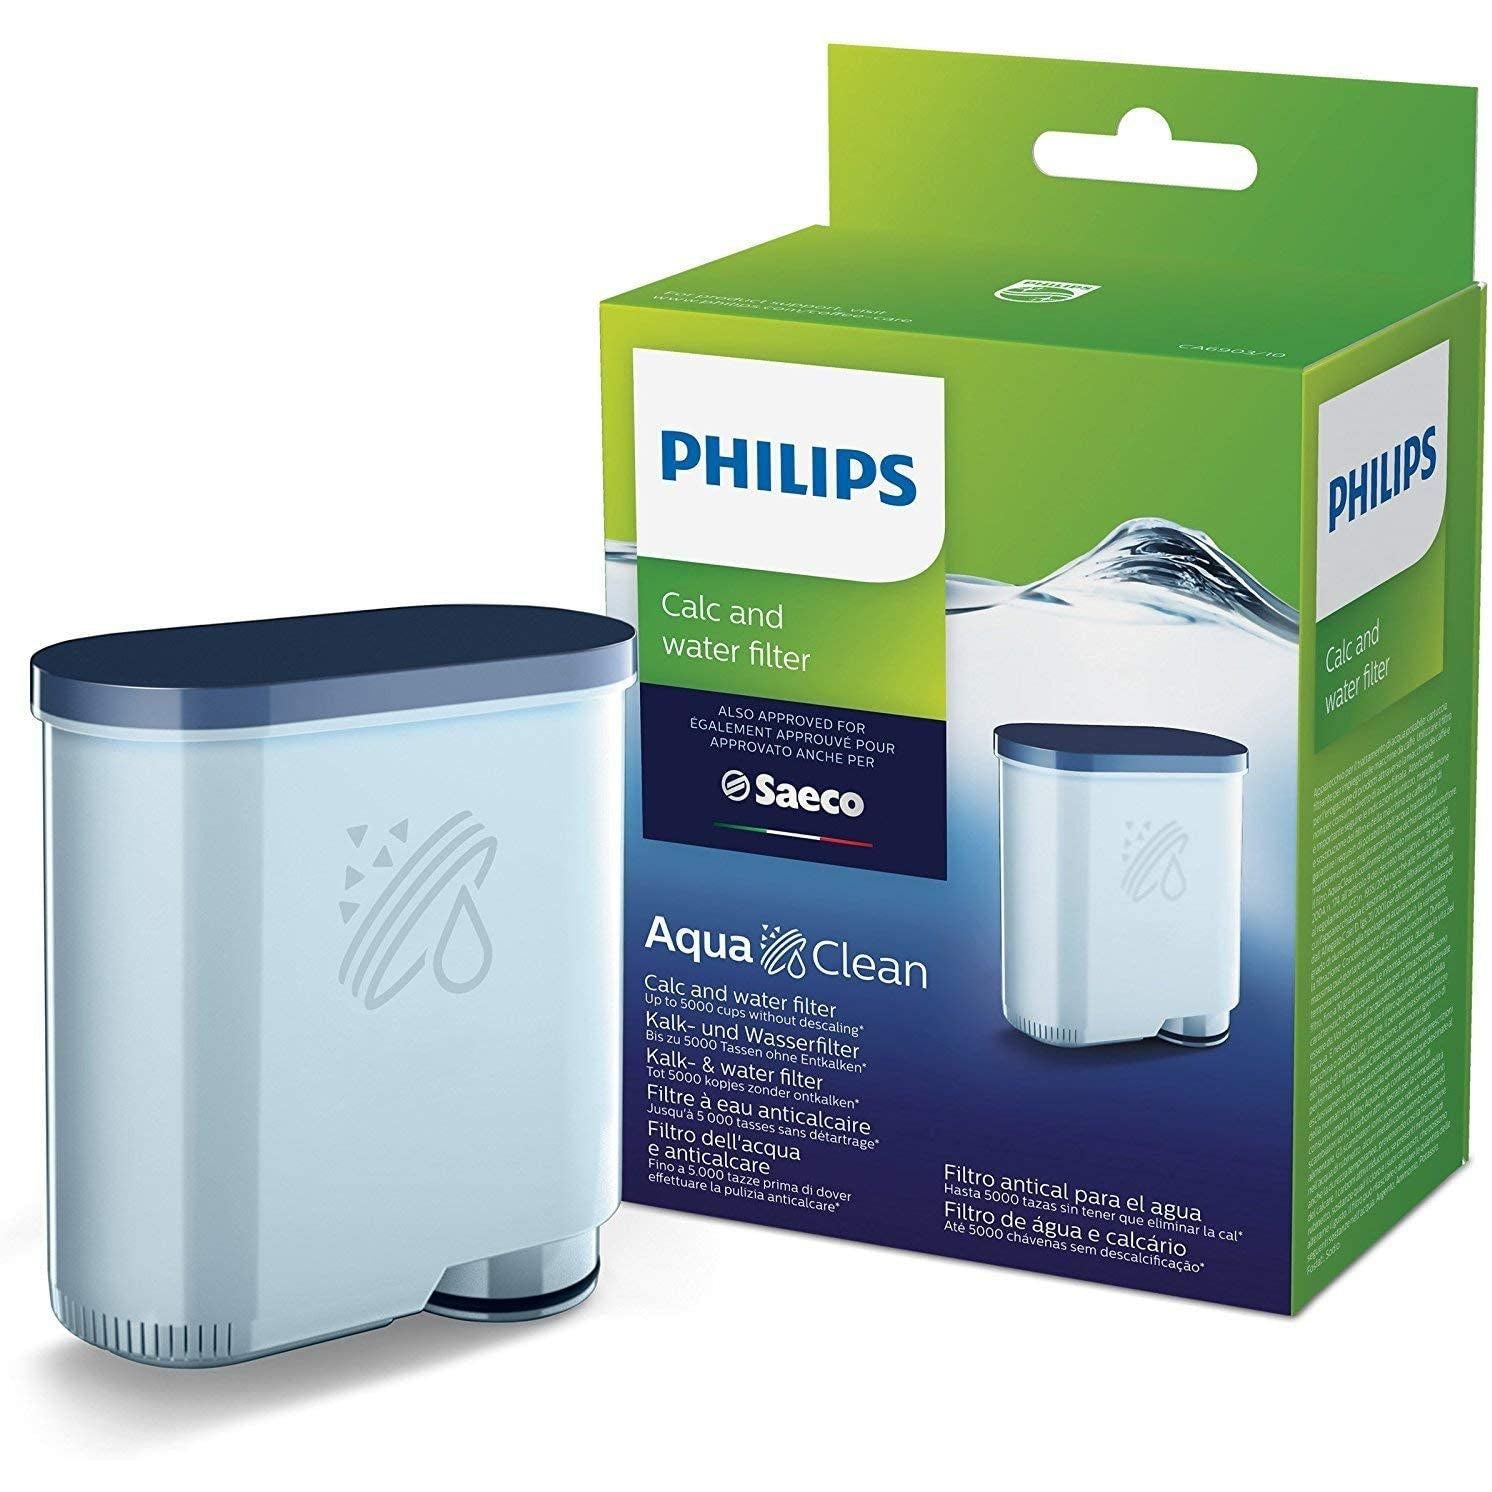 Philips AquaClean Calc and Water FIlter for Espresso Machine - CA6903/10 - Healthxpress.ie